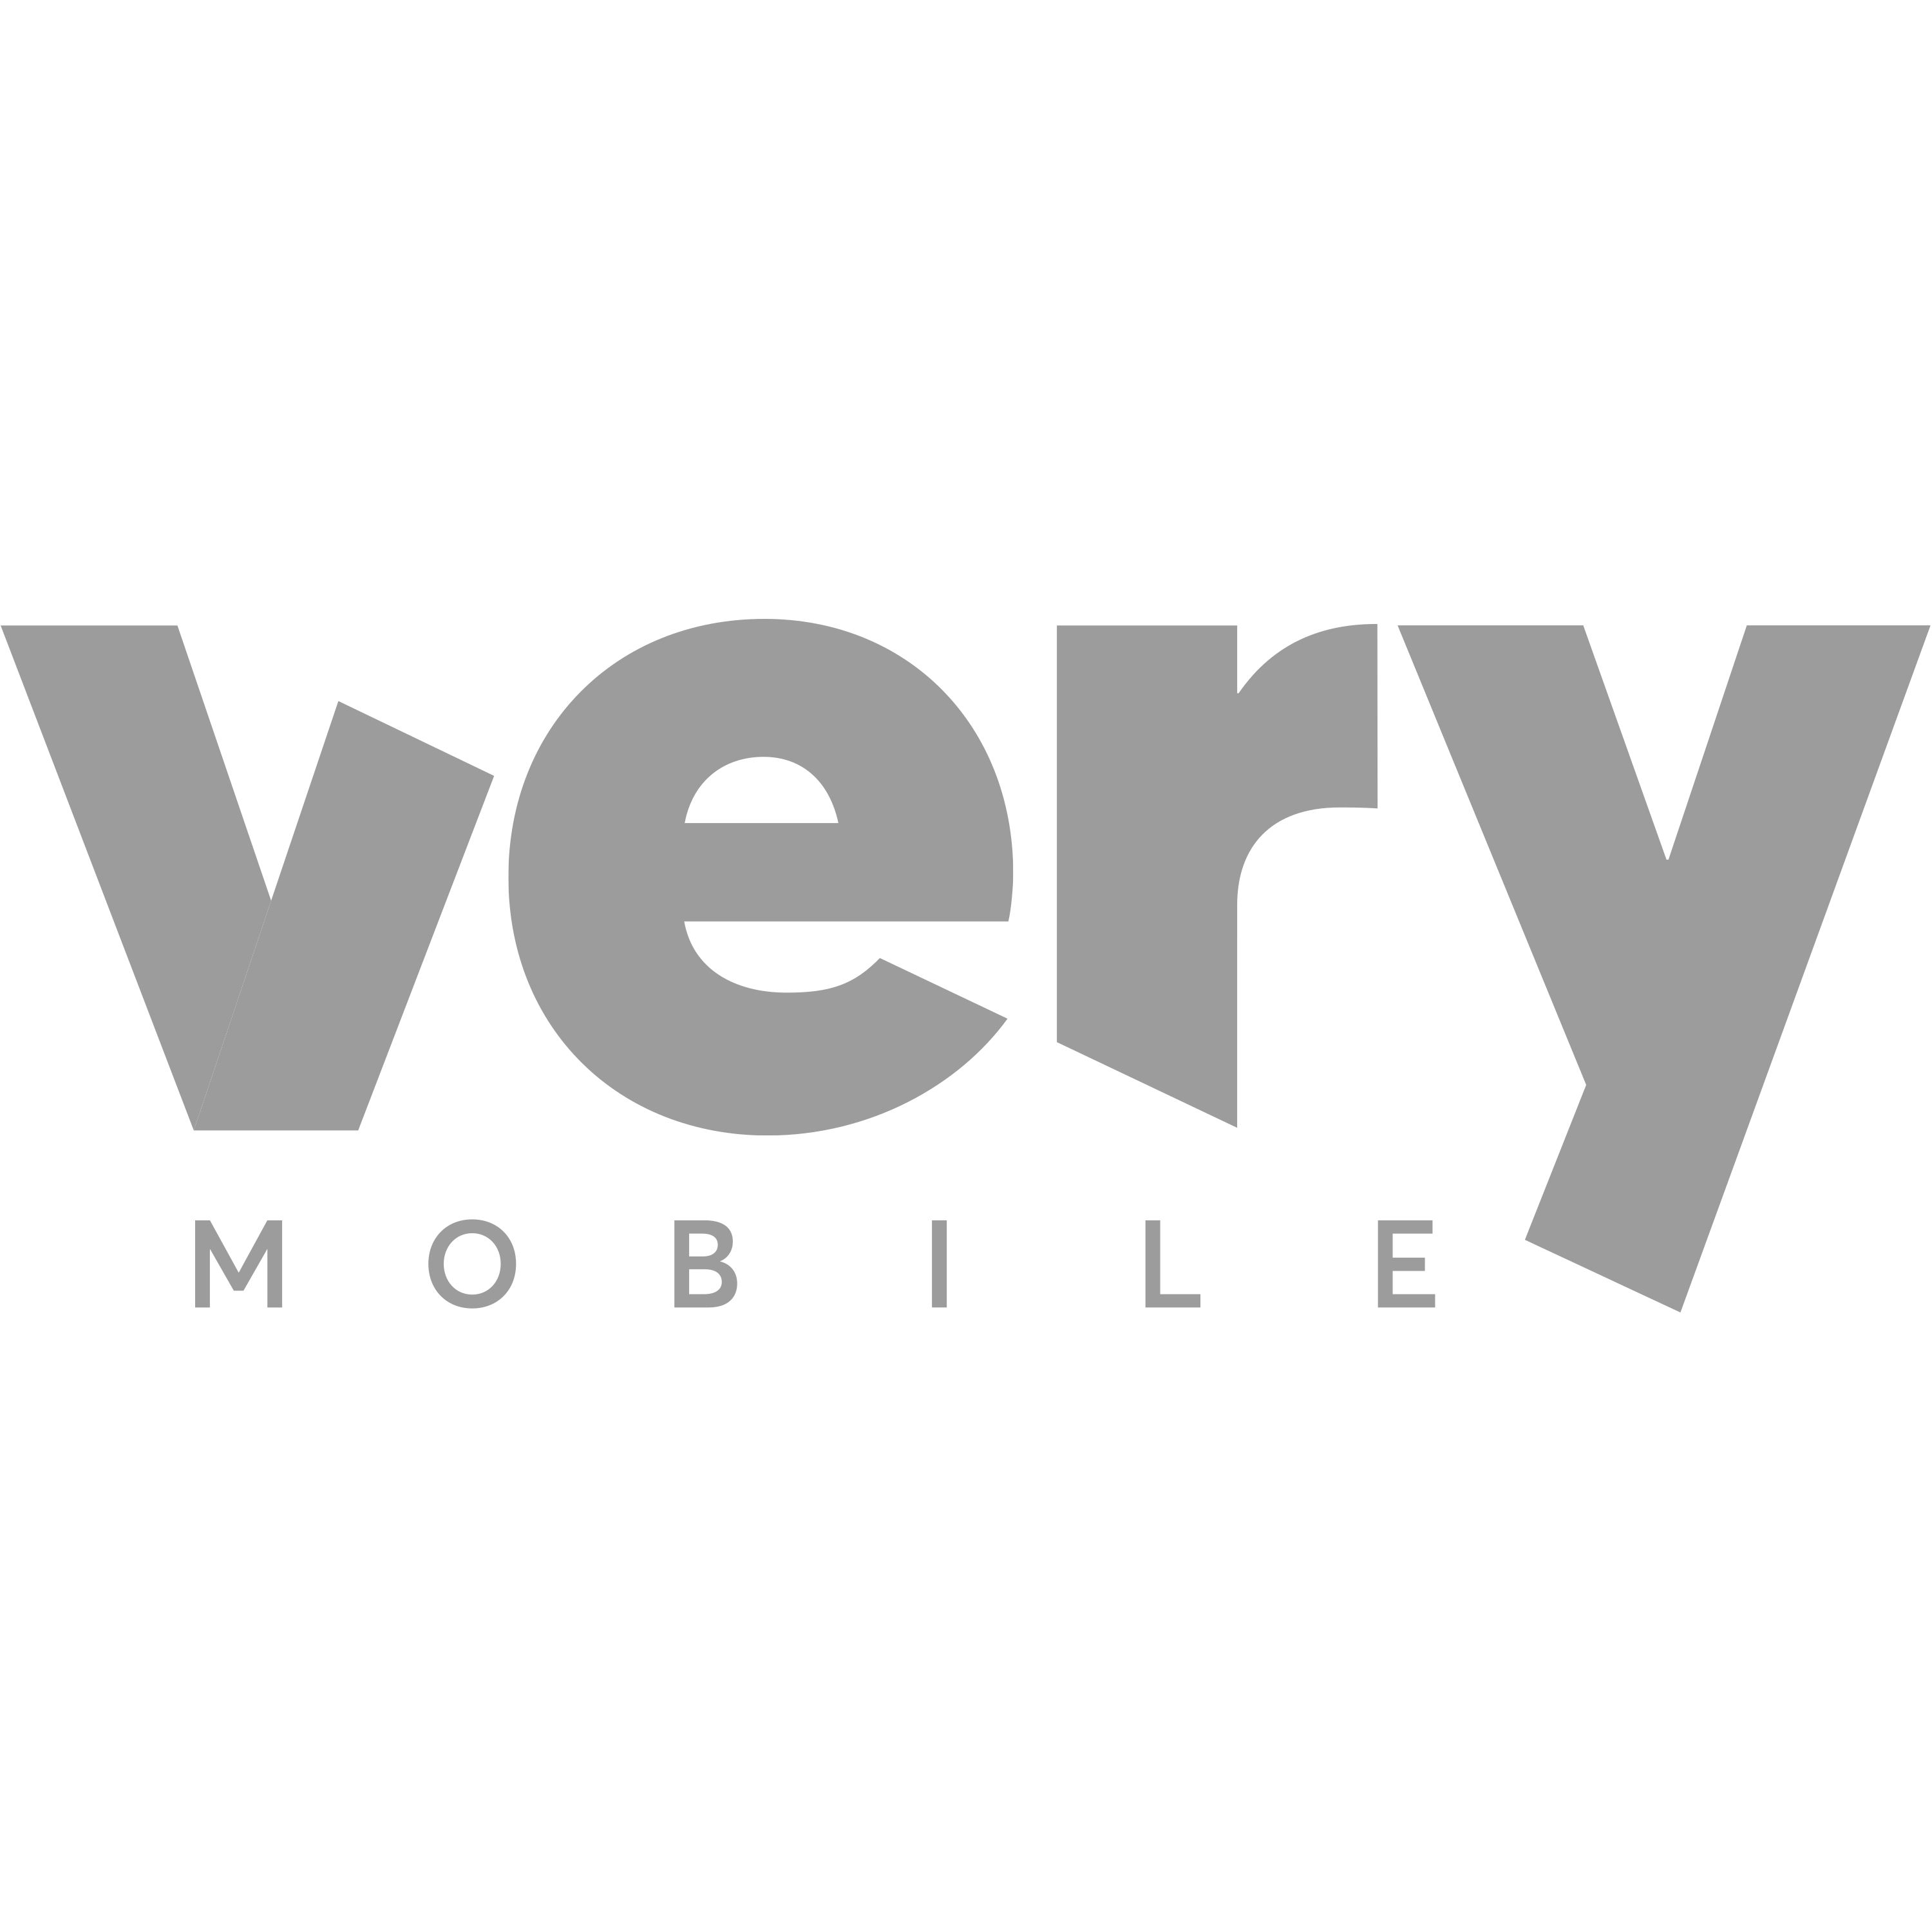 Very Mobile Logo Transparent Picture